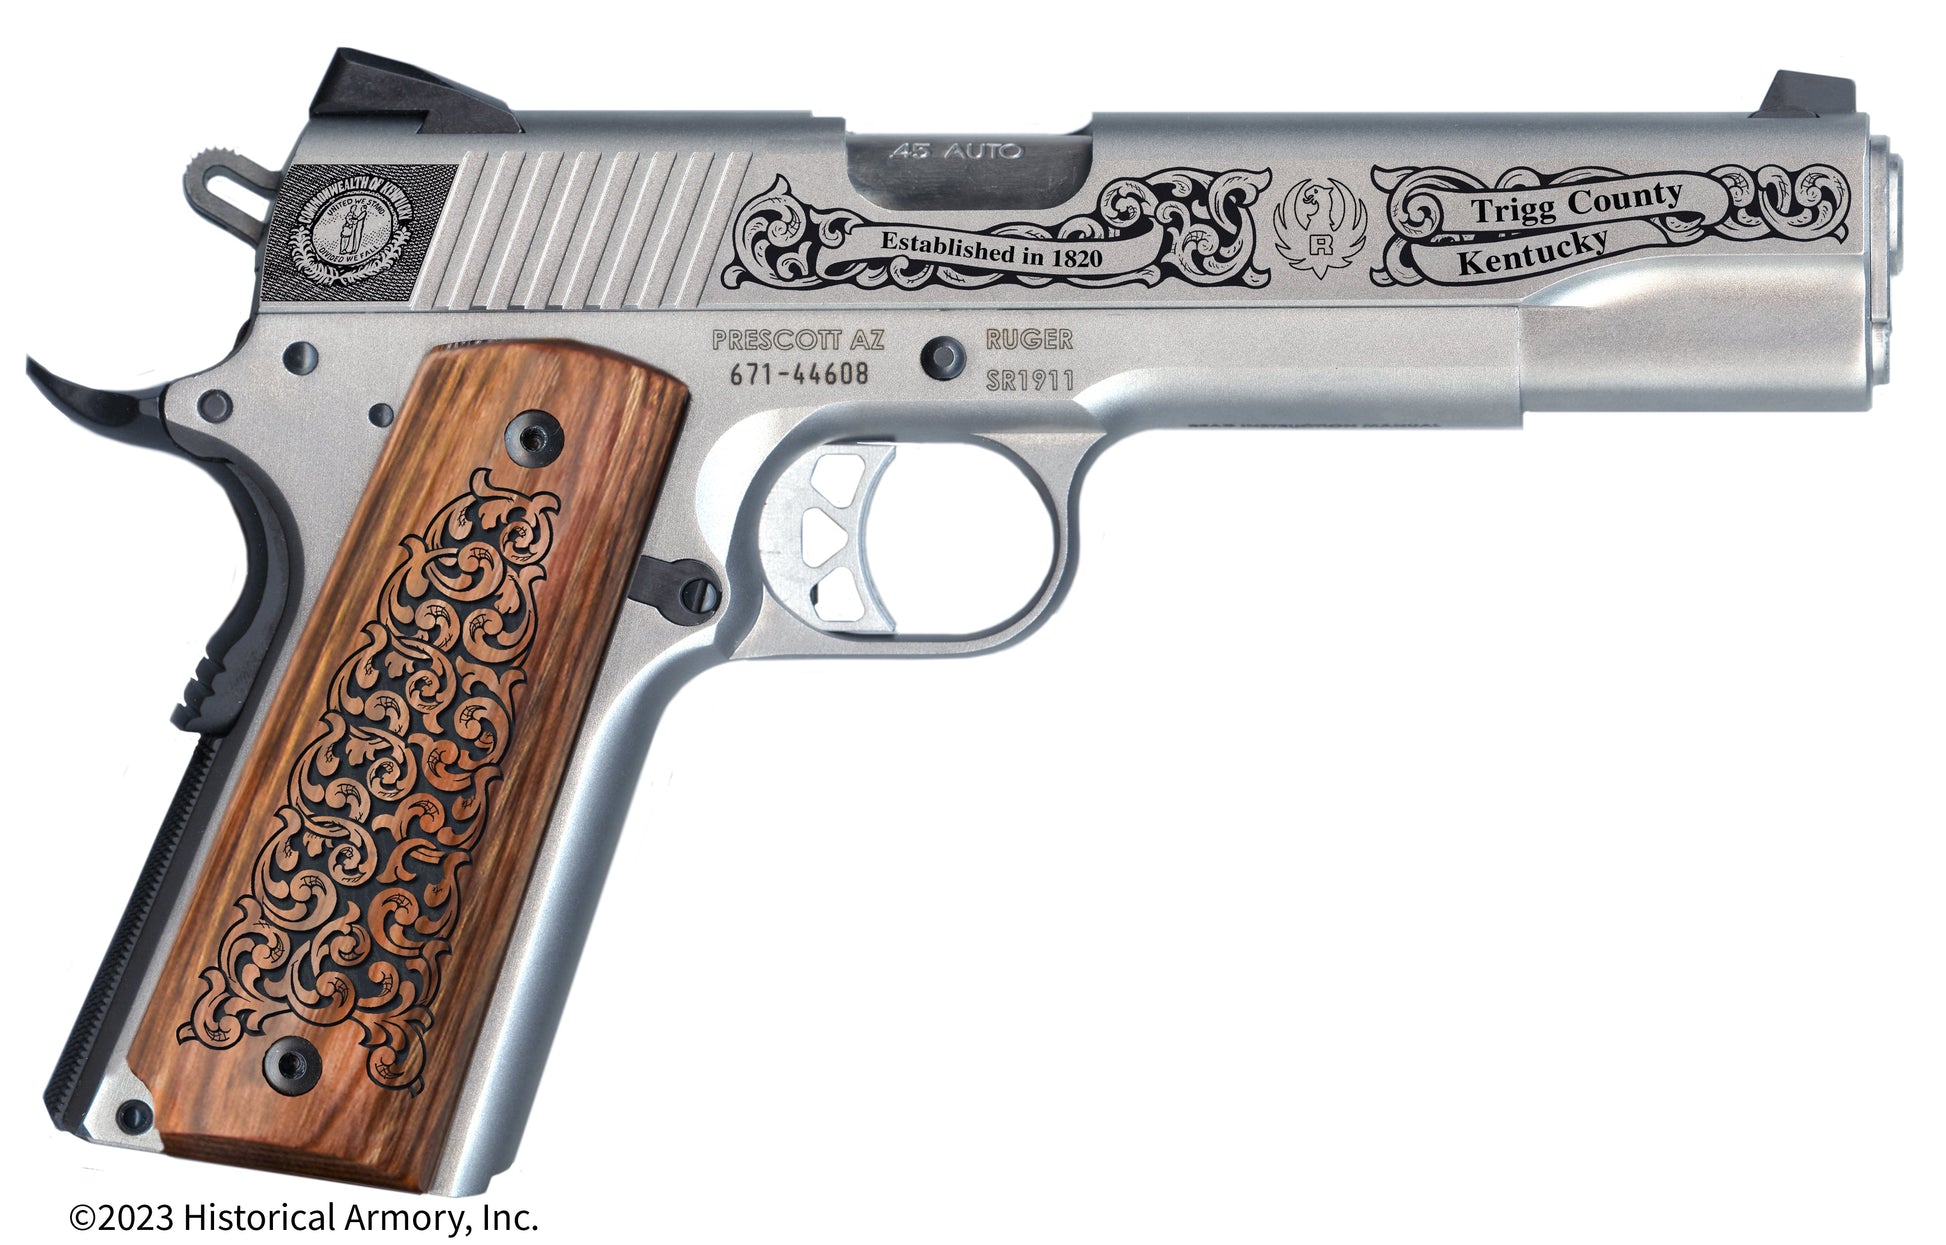 Trigg County Kentucky Engraved .45 Auto Ruger 1911